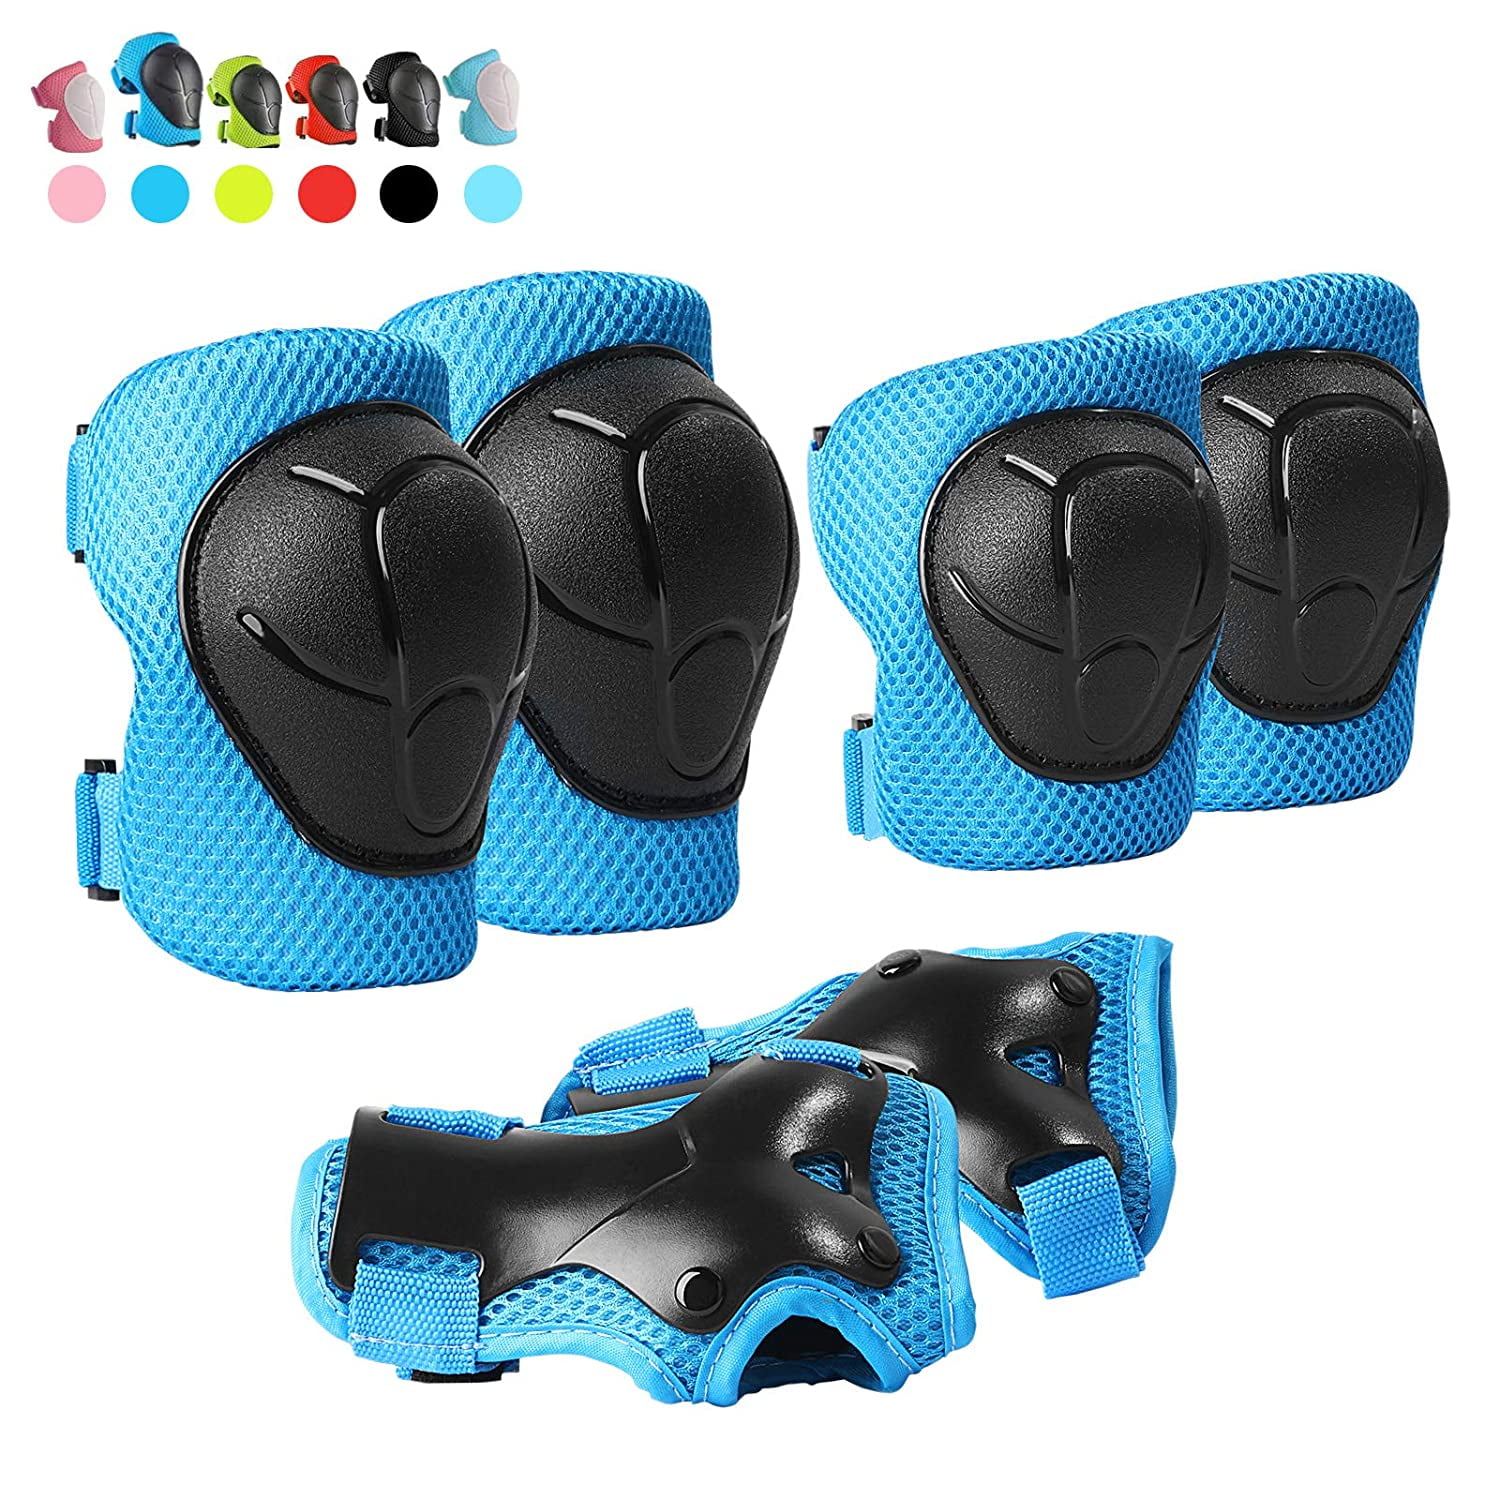 Protective Safety Gear pads skate Guard Elbow Knee Wrist Kids Children 6Pcs H210 